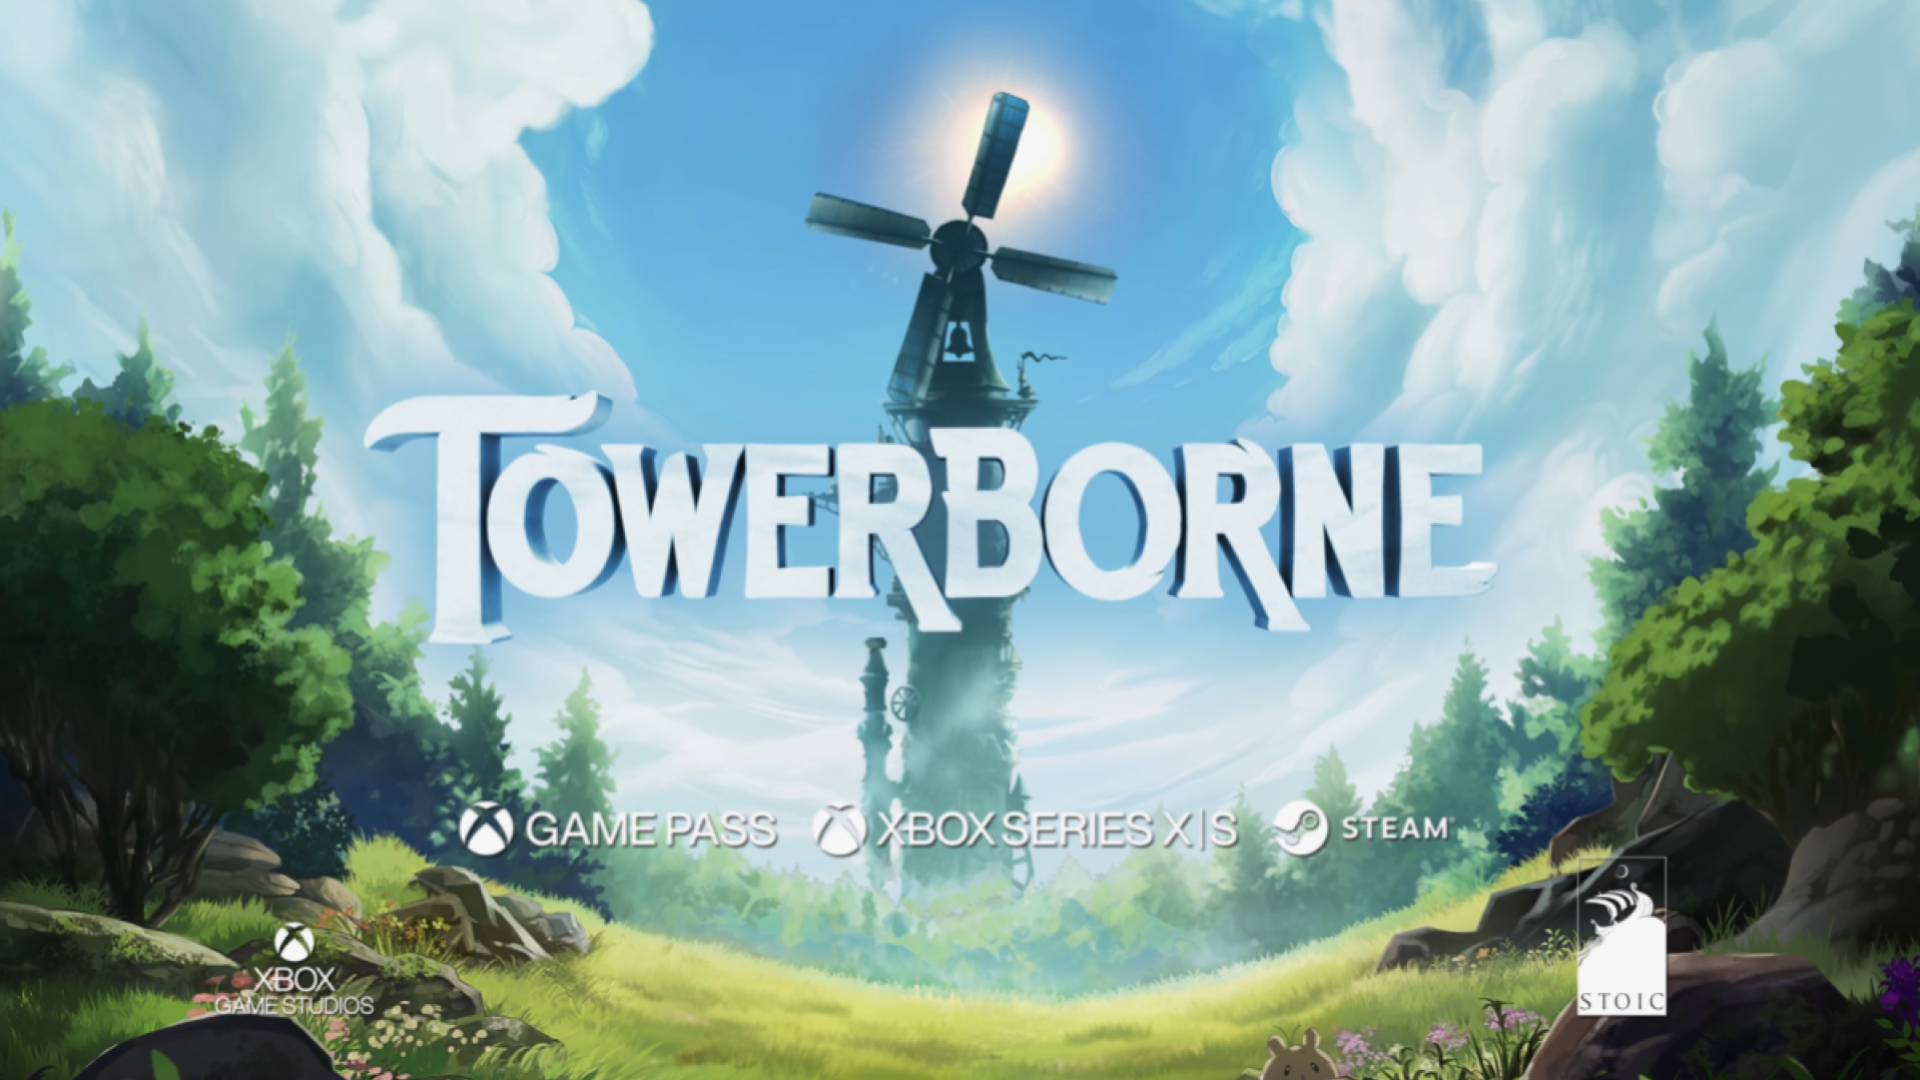 Towerborne is a Gorgeous New Fantasy Action-Adventure Game by Stoic Studio and Xbox